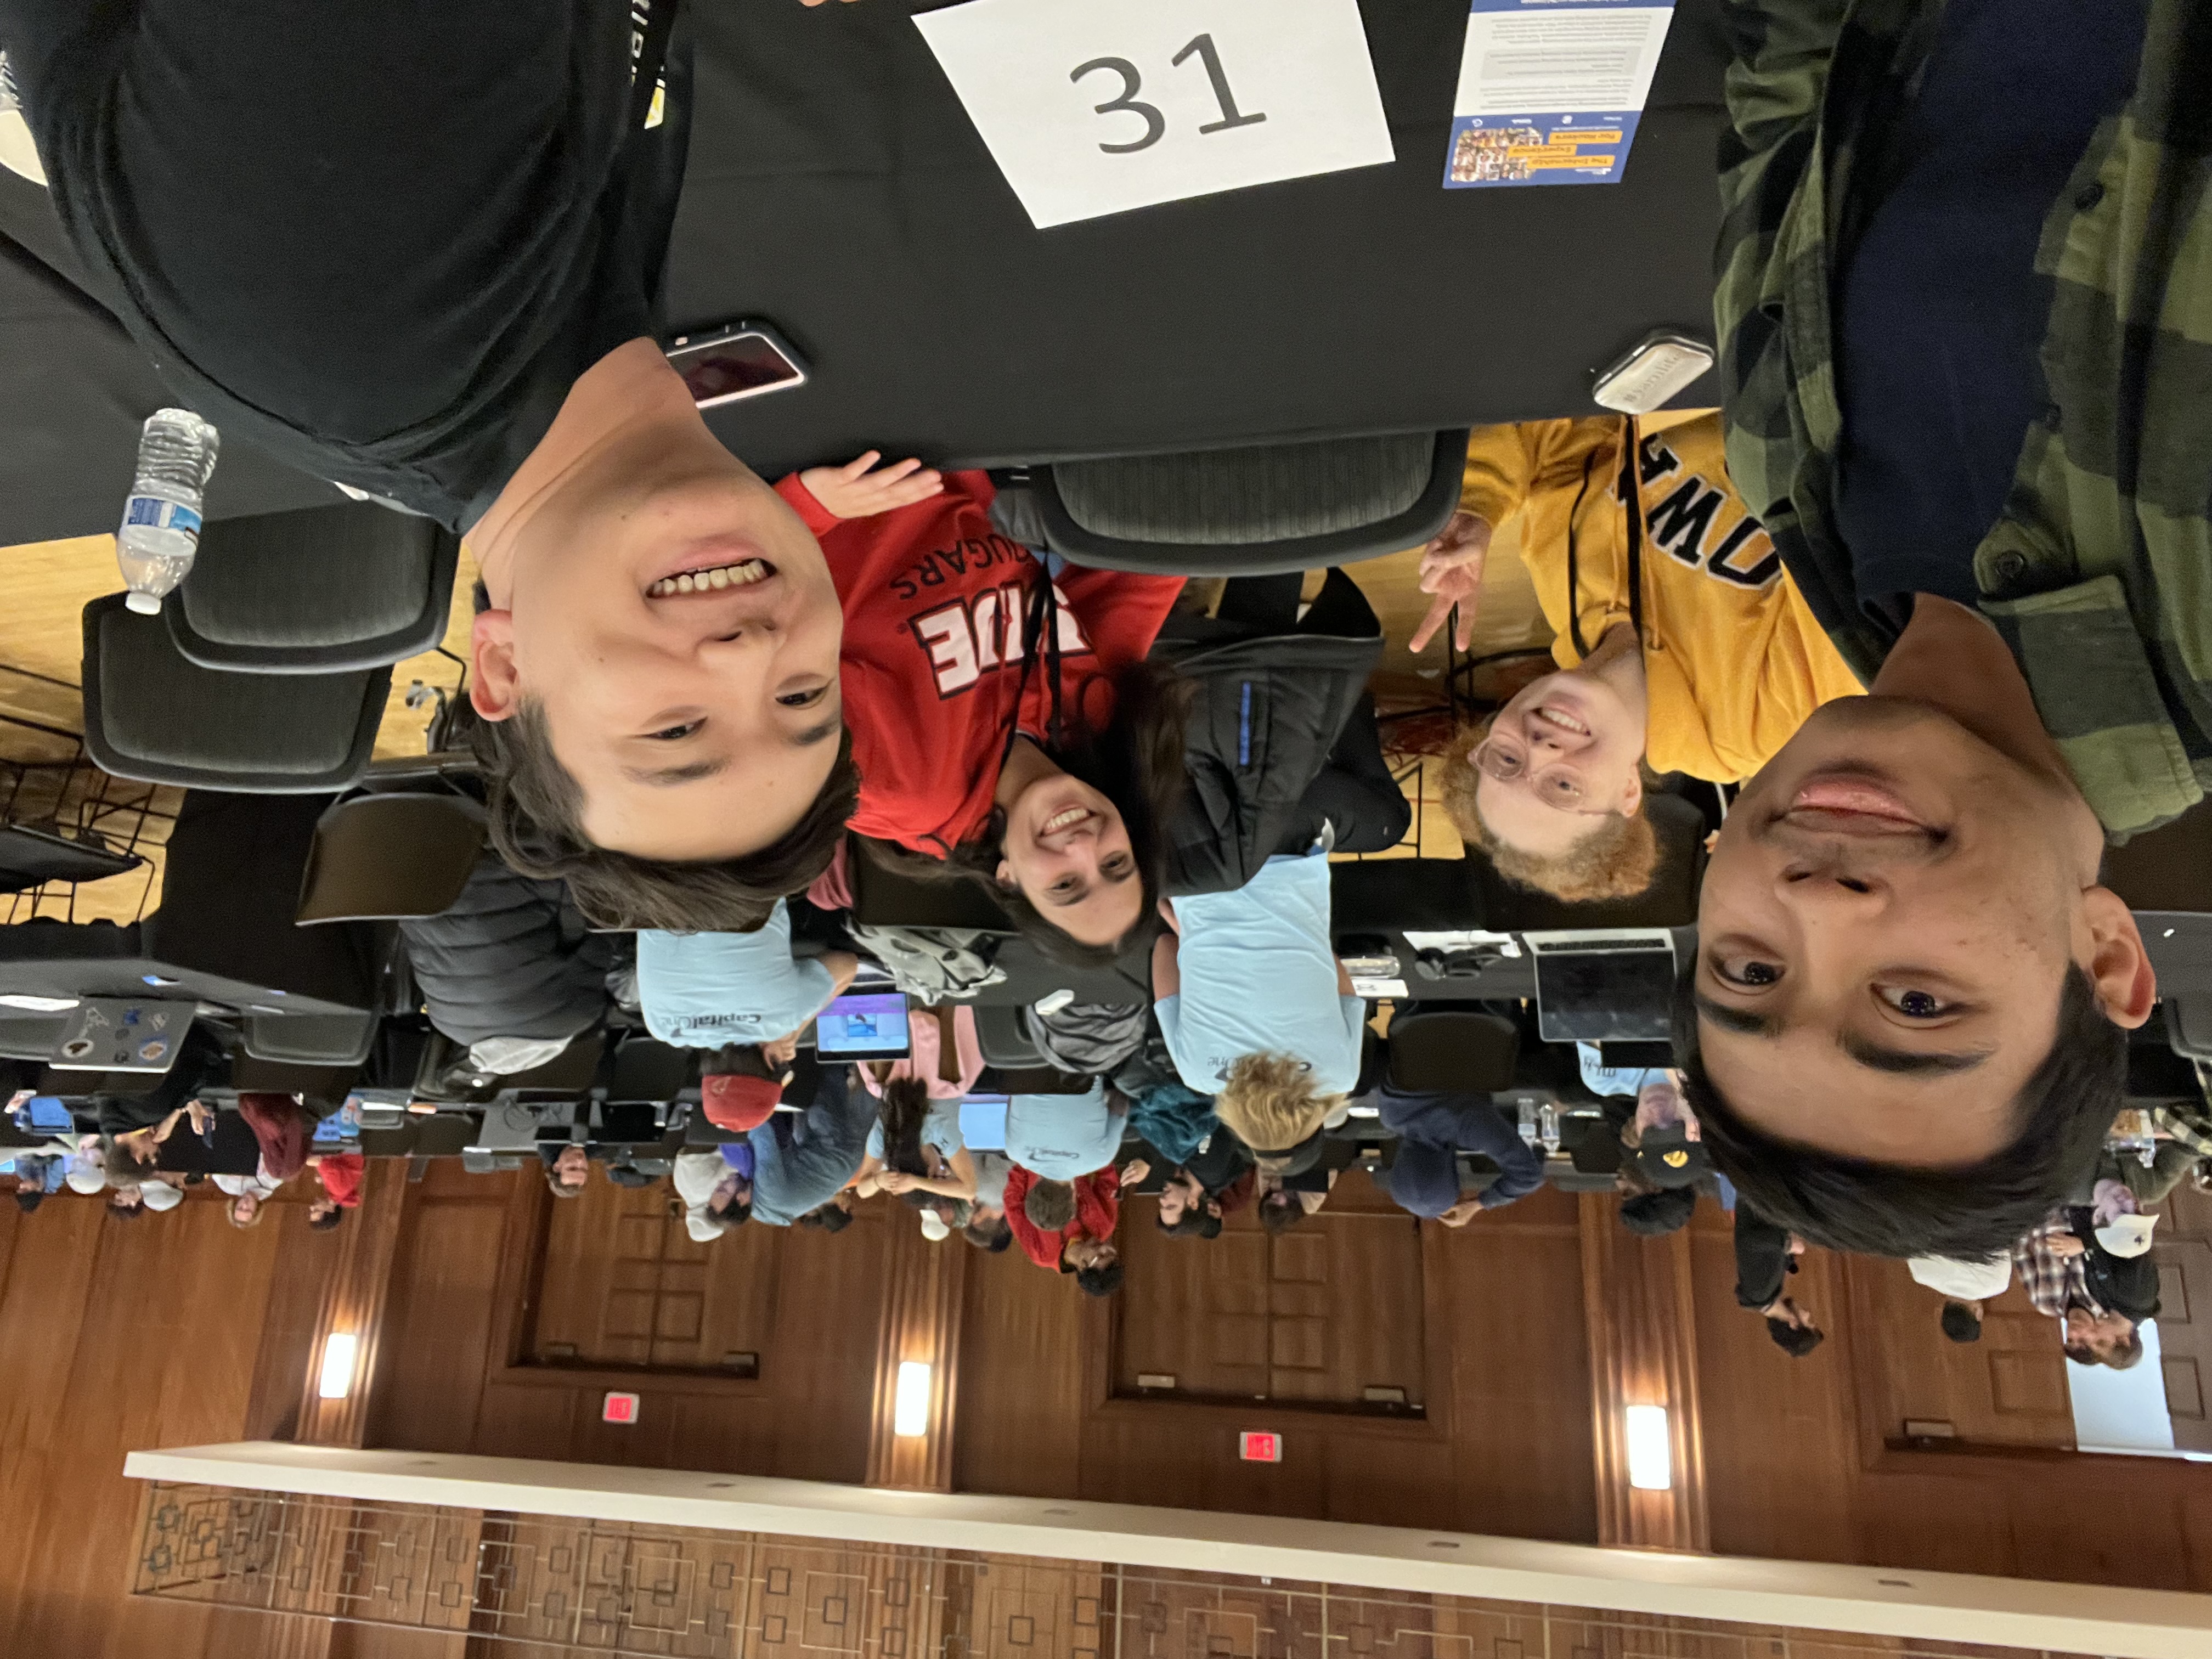 The four of us at the University of Iowa Hackathon